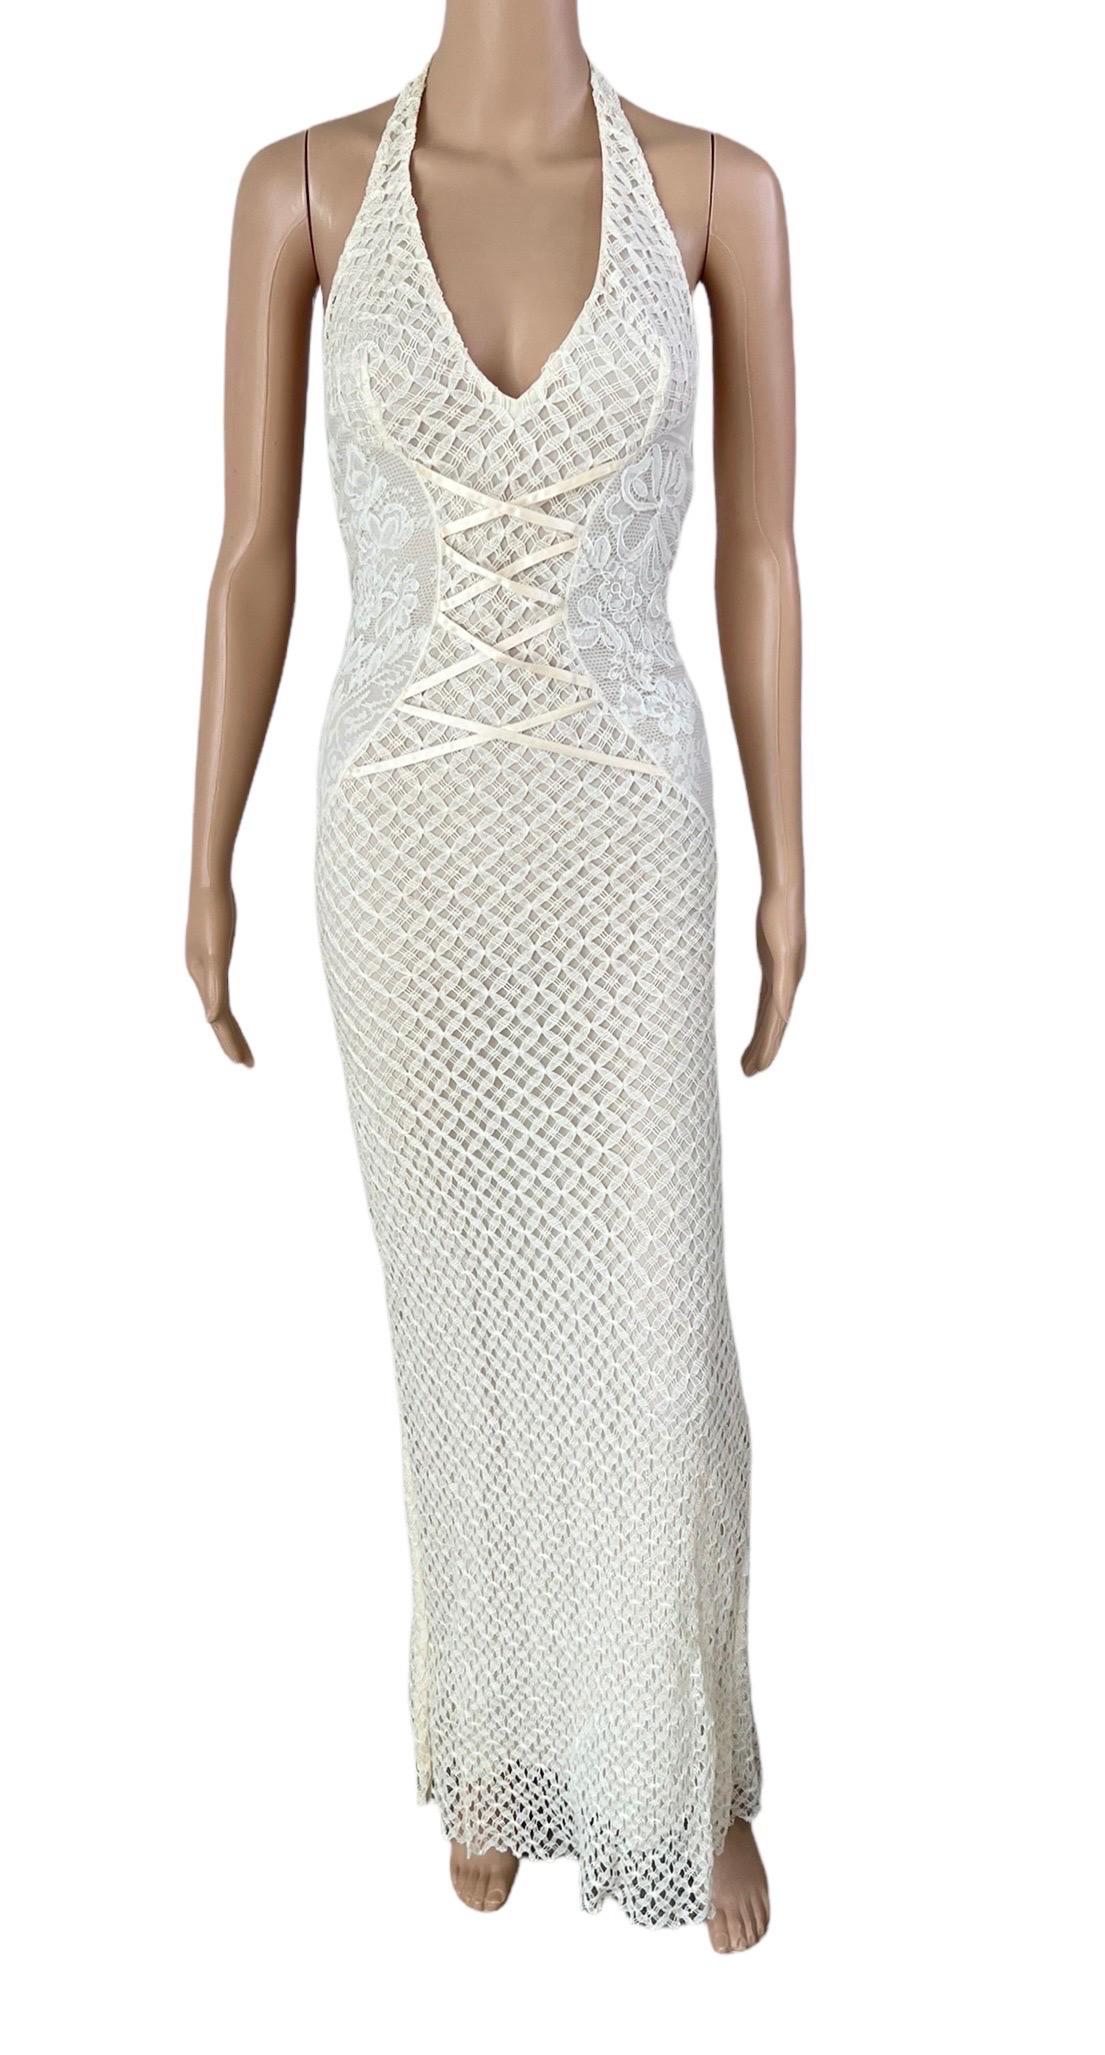 Gianni Versace S/S 2002 Plunging Backless Semi Sheer Lace Knit Ivory Dress Gown 3